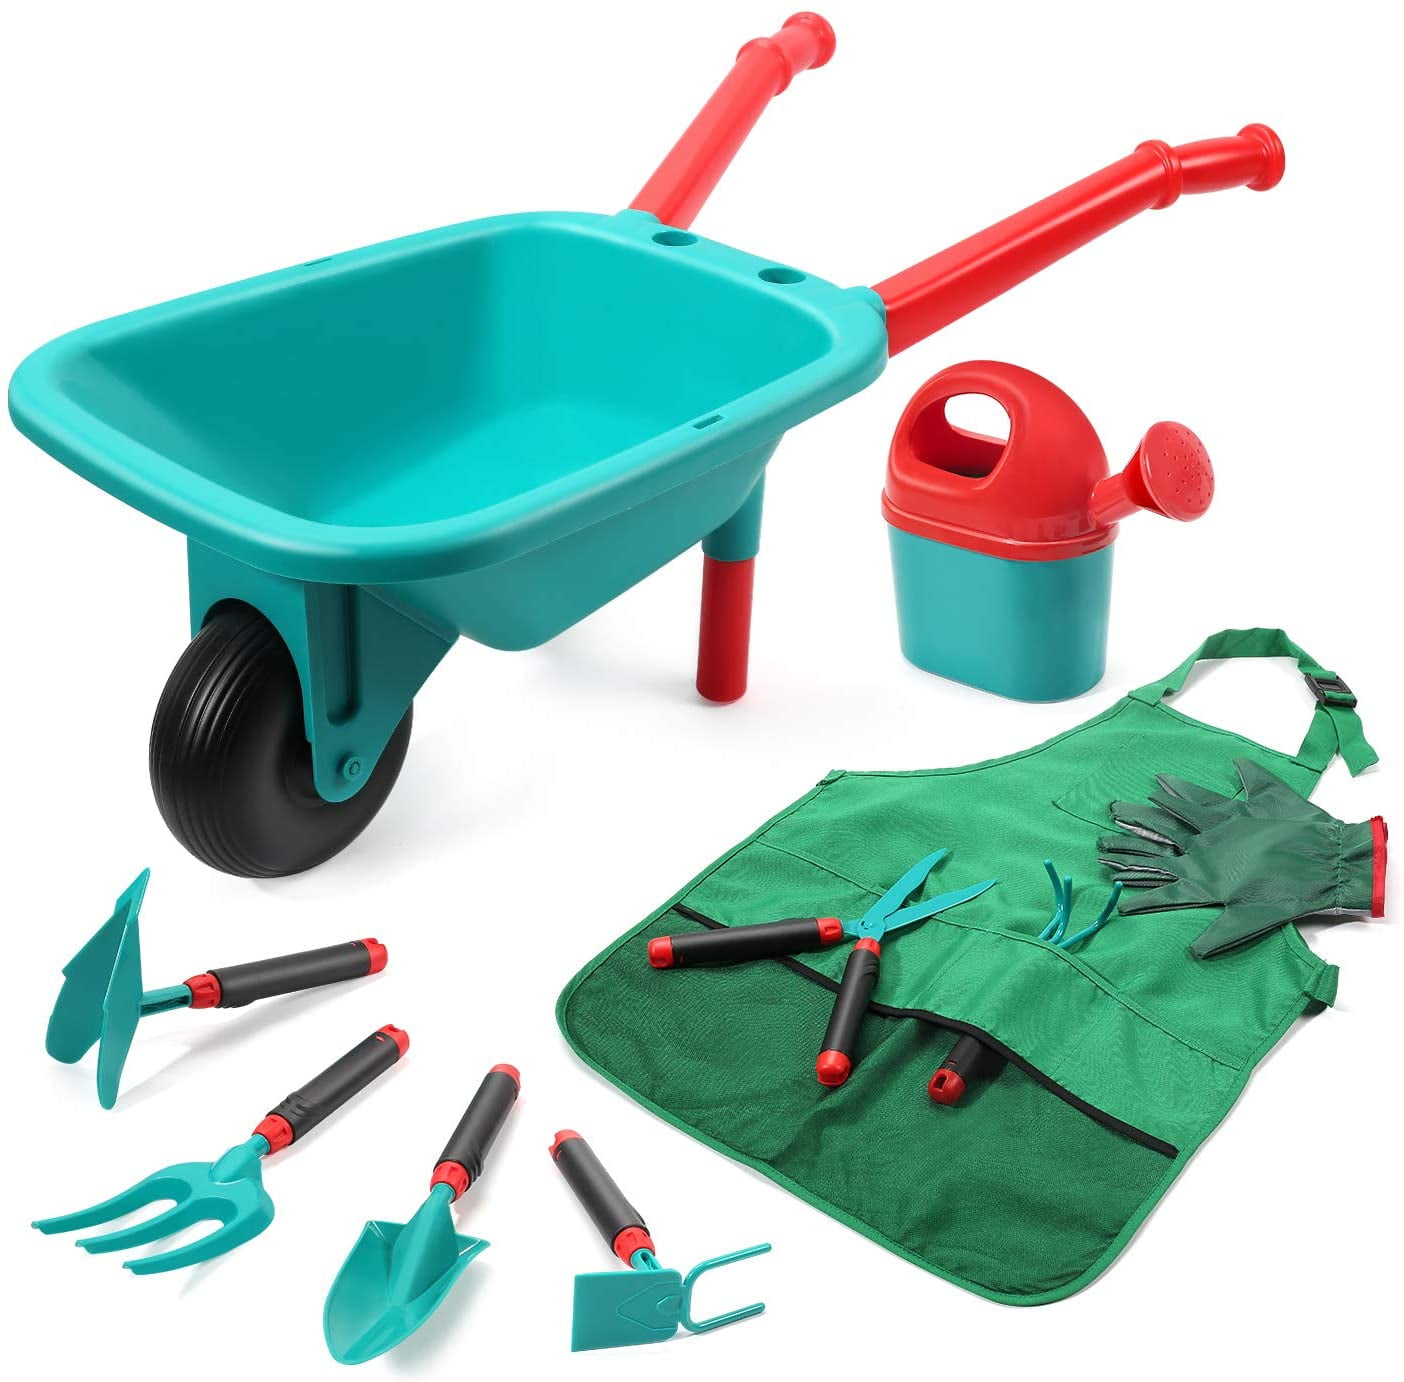 Childrens Garden Tool Set, 6 Tools and Watering can in a Carrying Bag Childrens Gardening Tool kit Set Outdoor Garden Color Box Packaging Environmental Protection Play Tools for The Garden/Beach 